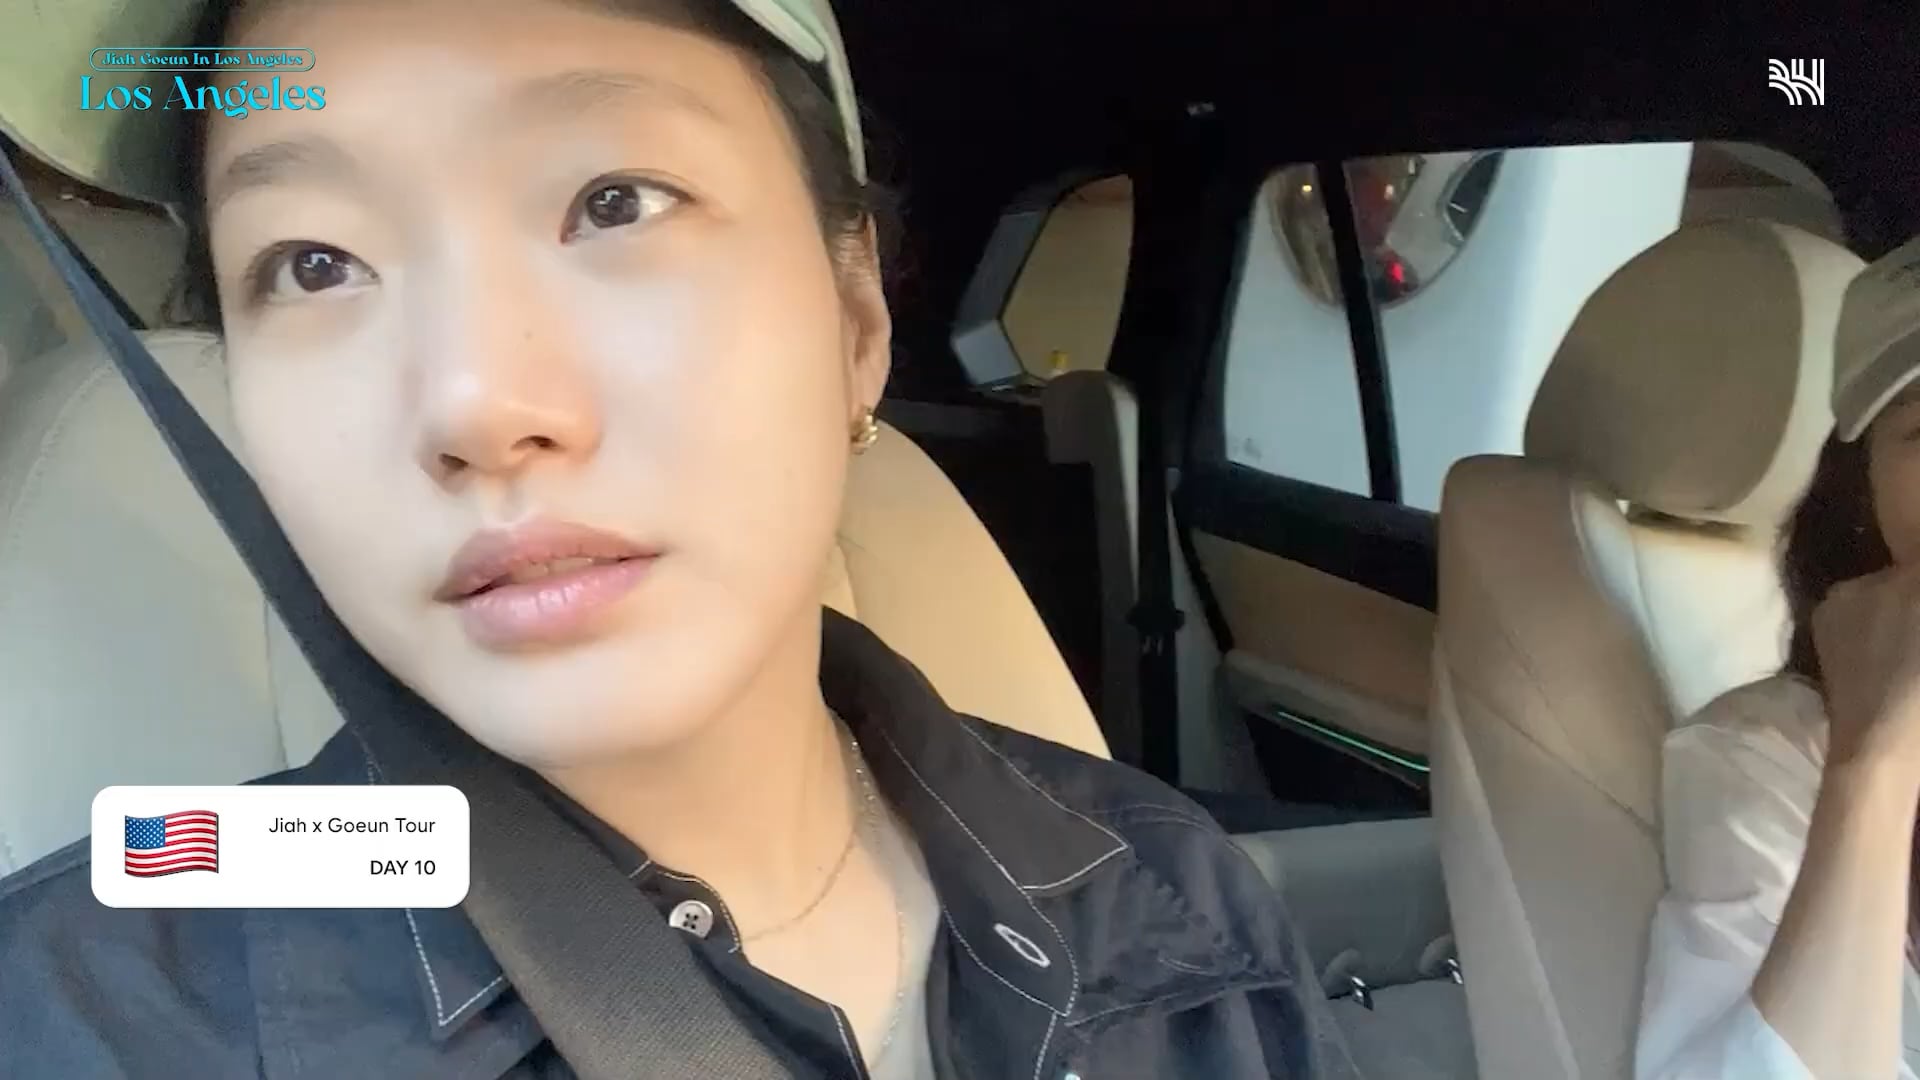 240209 Rosé with Go-eun and Ji-ah hanging out in LA (from Go-eun’s vlog)